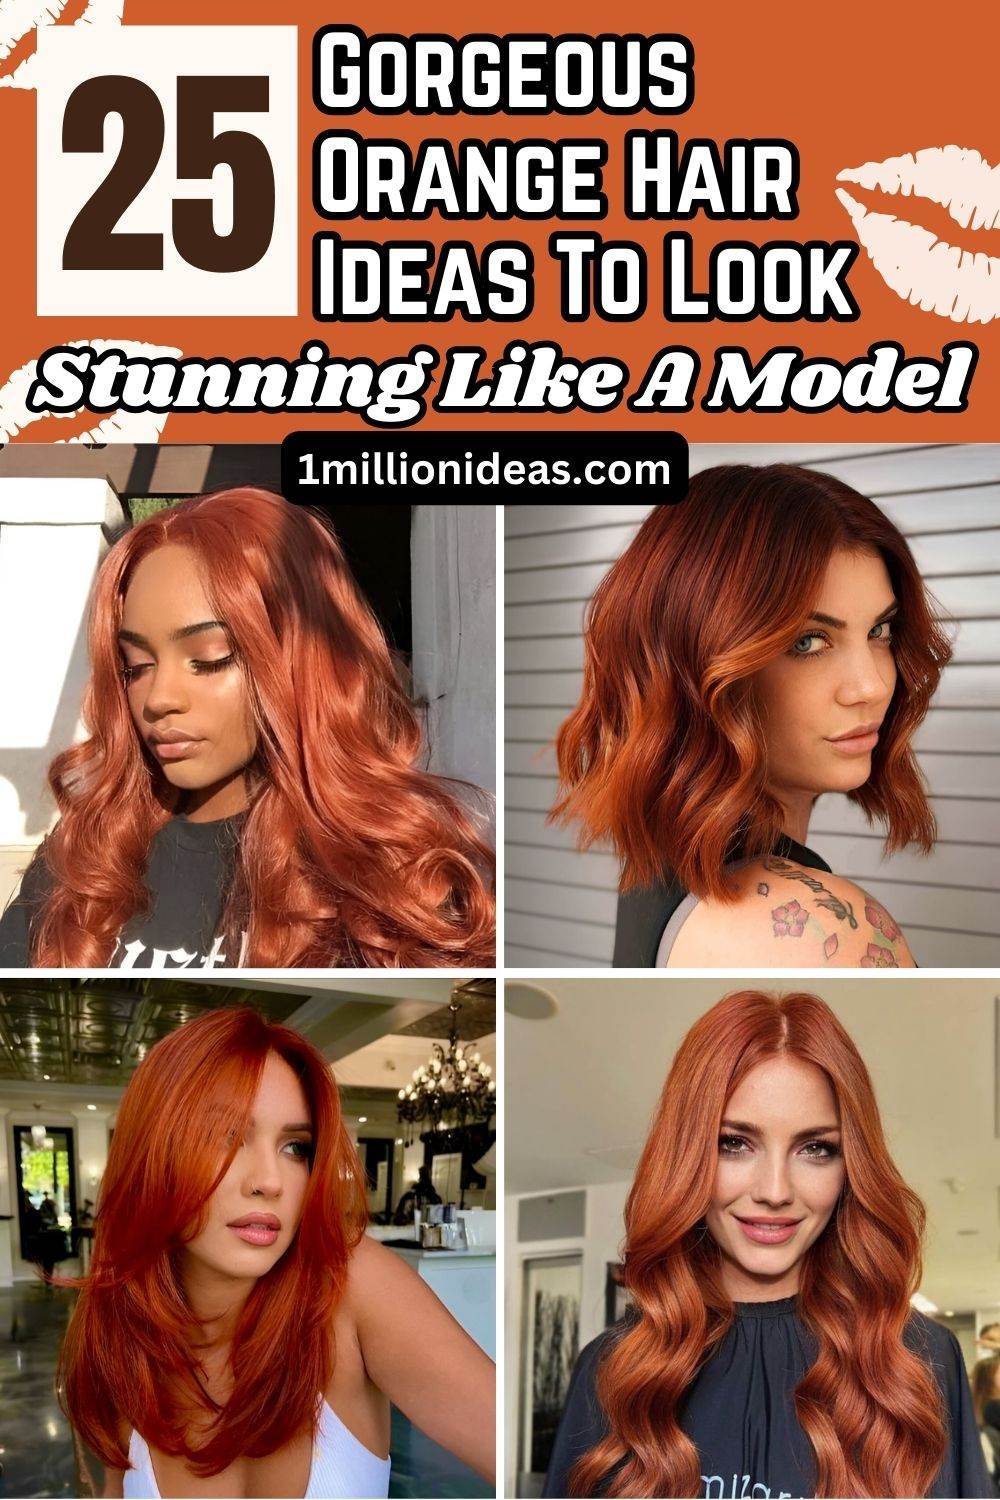 25 Gorgeous Orange Hair Ideas To Look Stunning Like A Model - 161